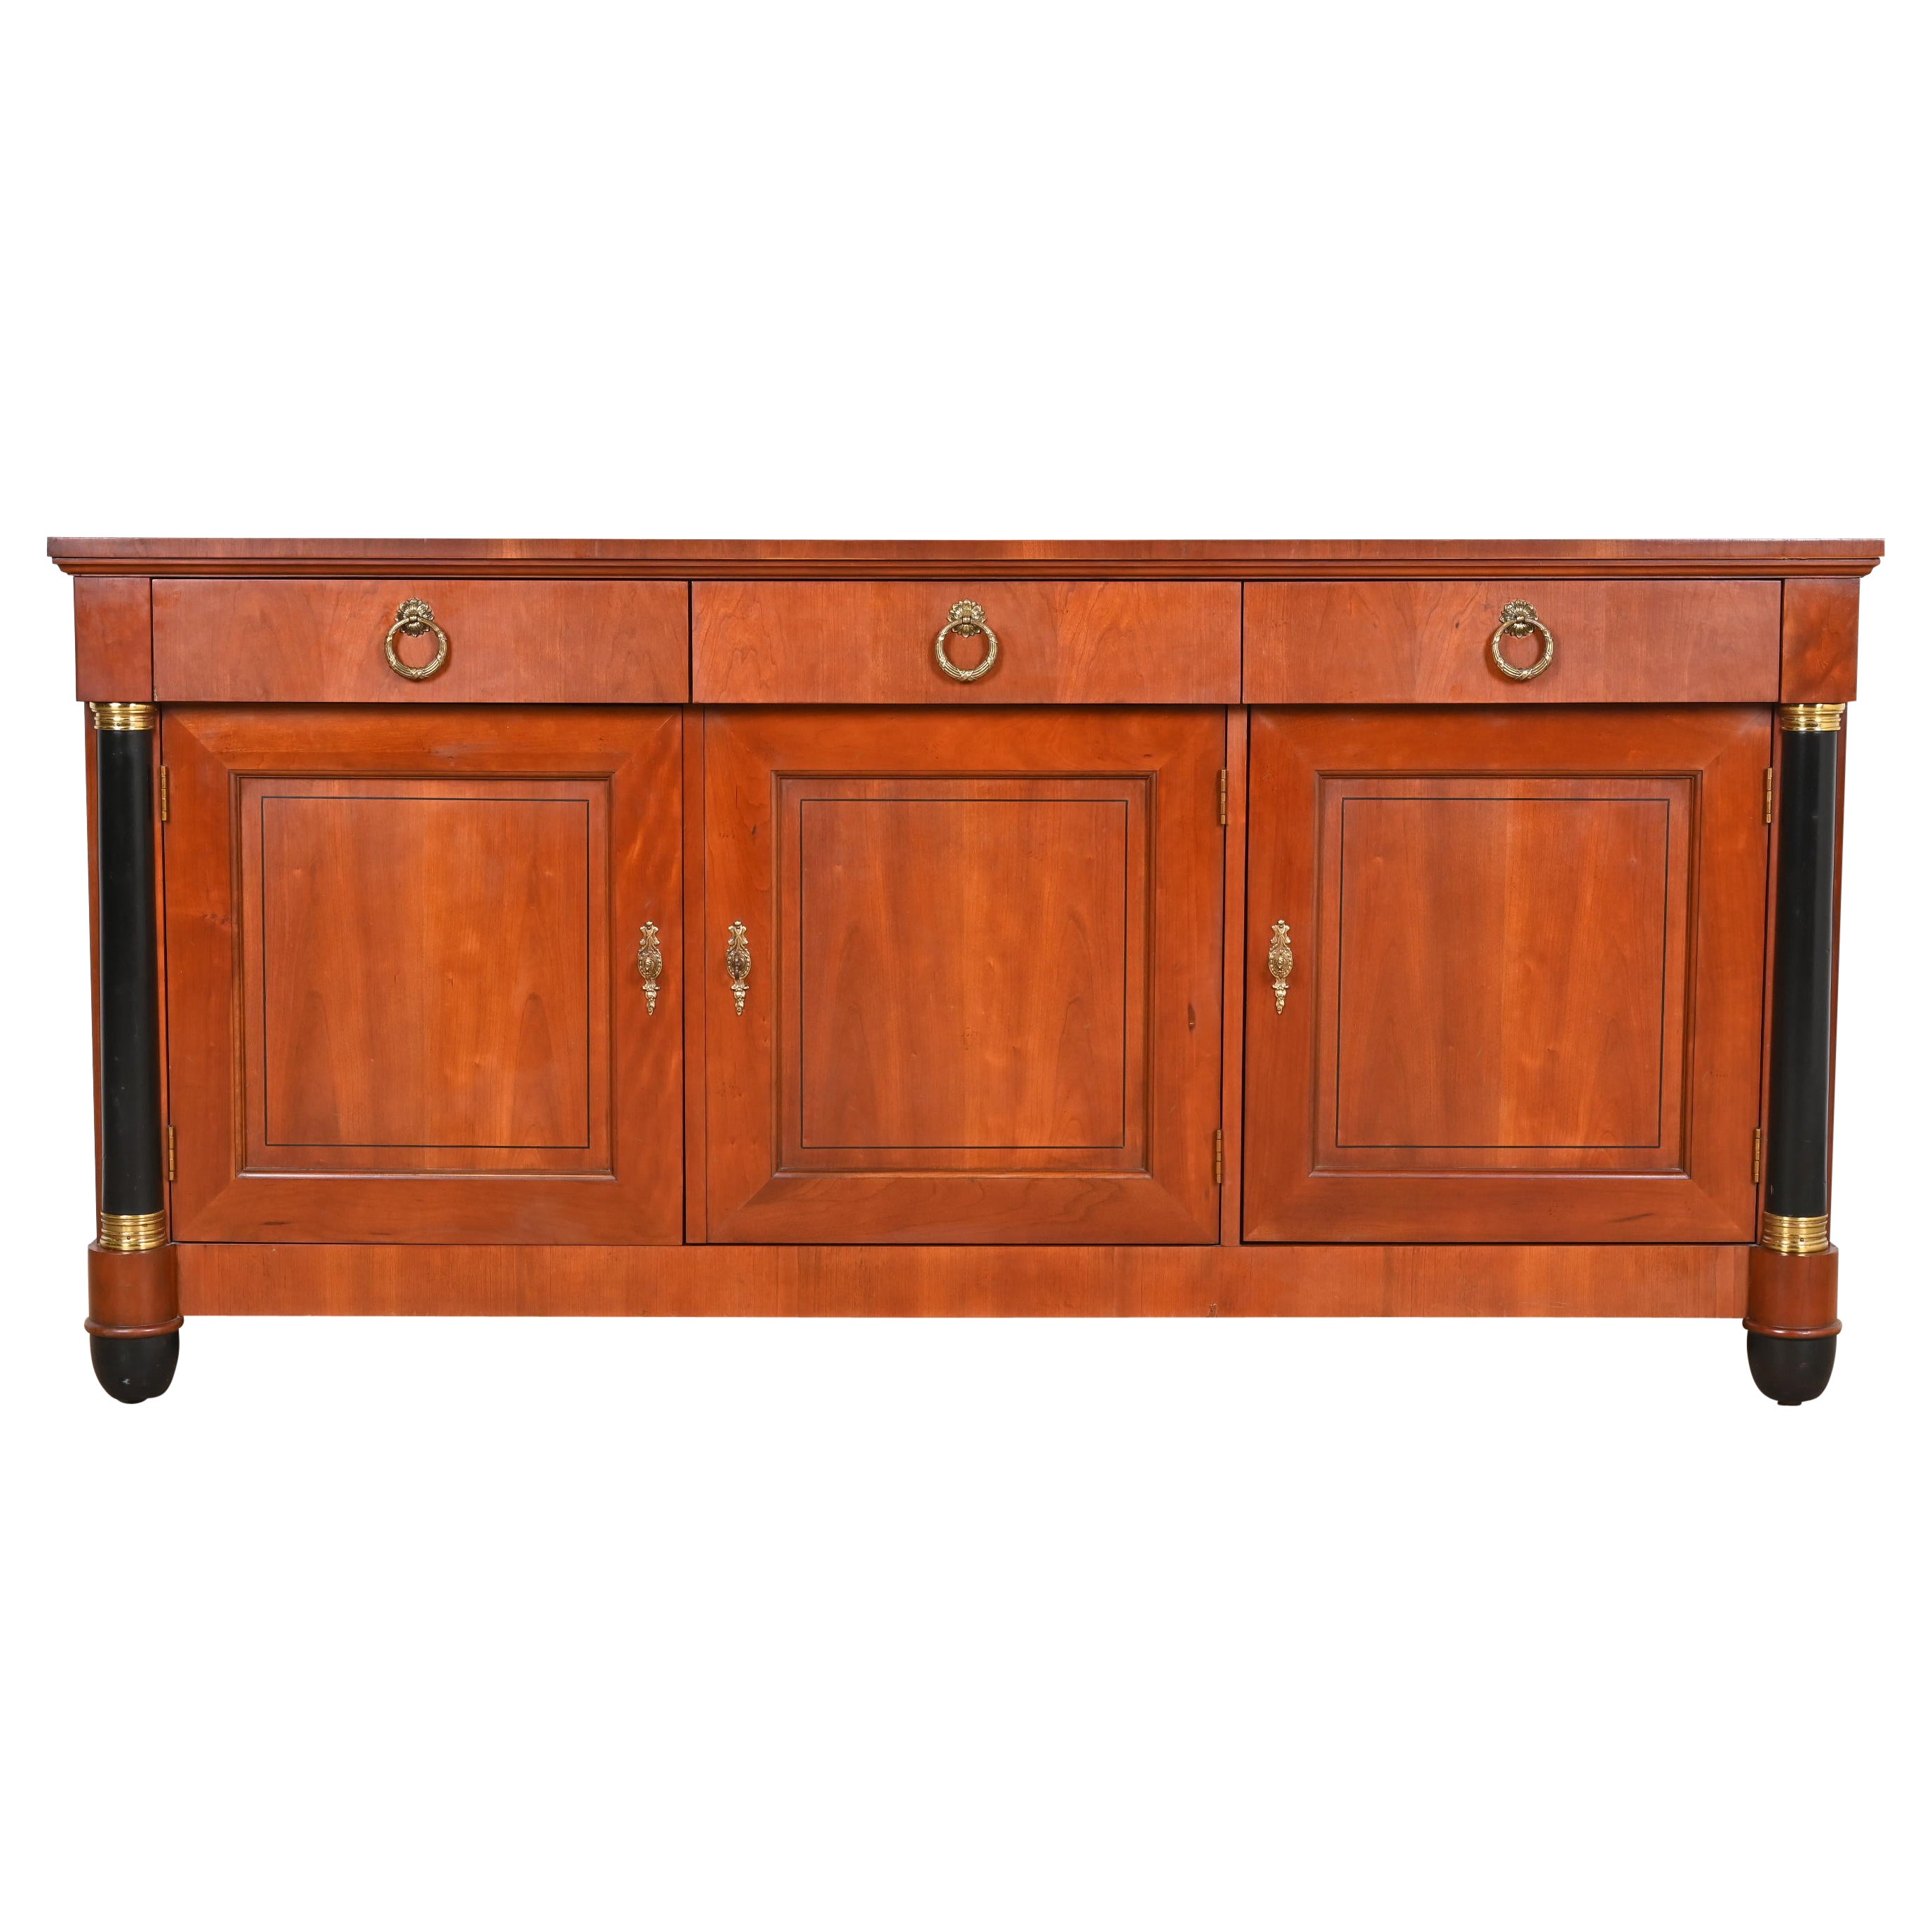 Baker French Empire Cherry Wood and Parcel Ebonized Sideboard or Bar Cabinet